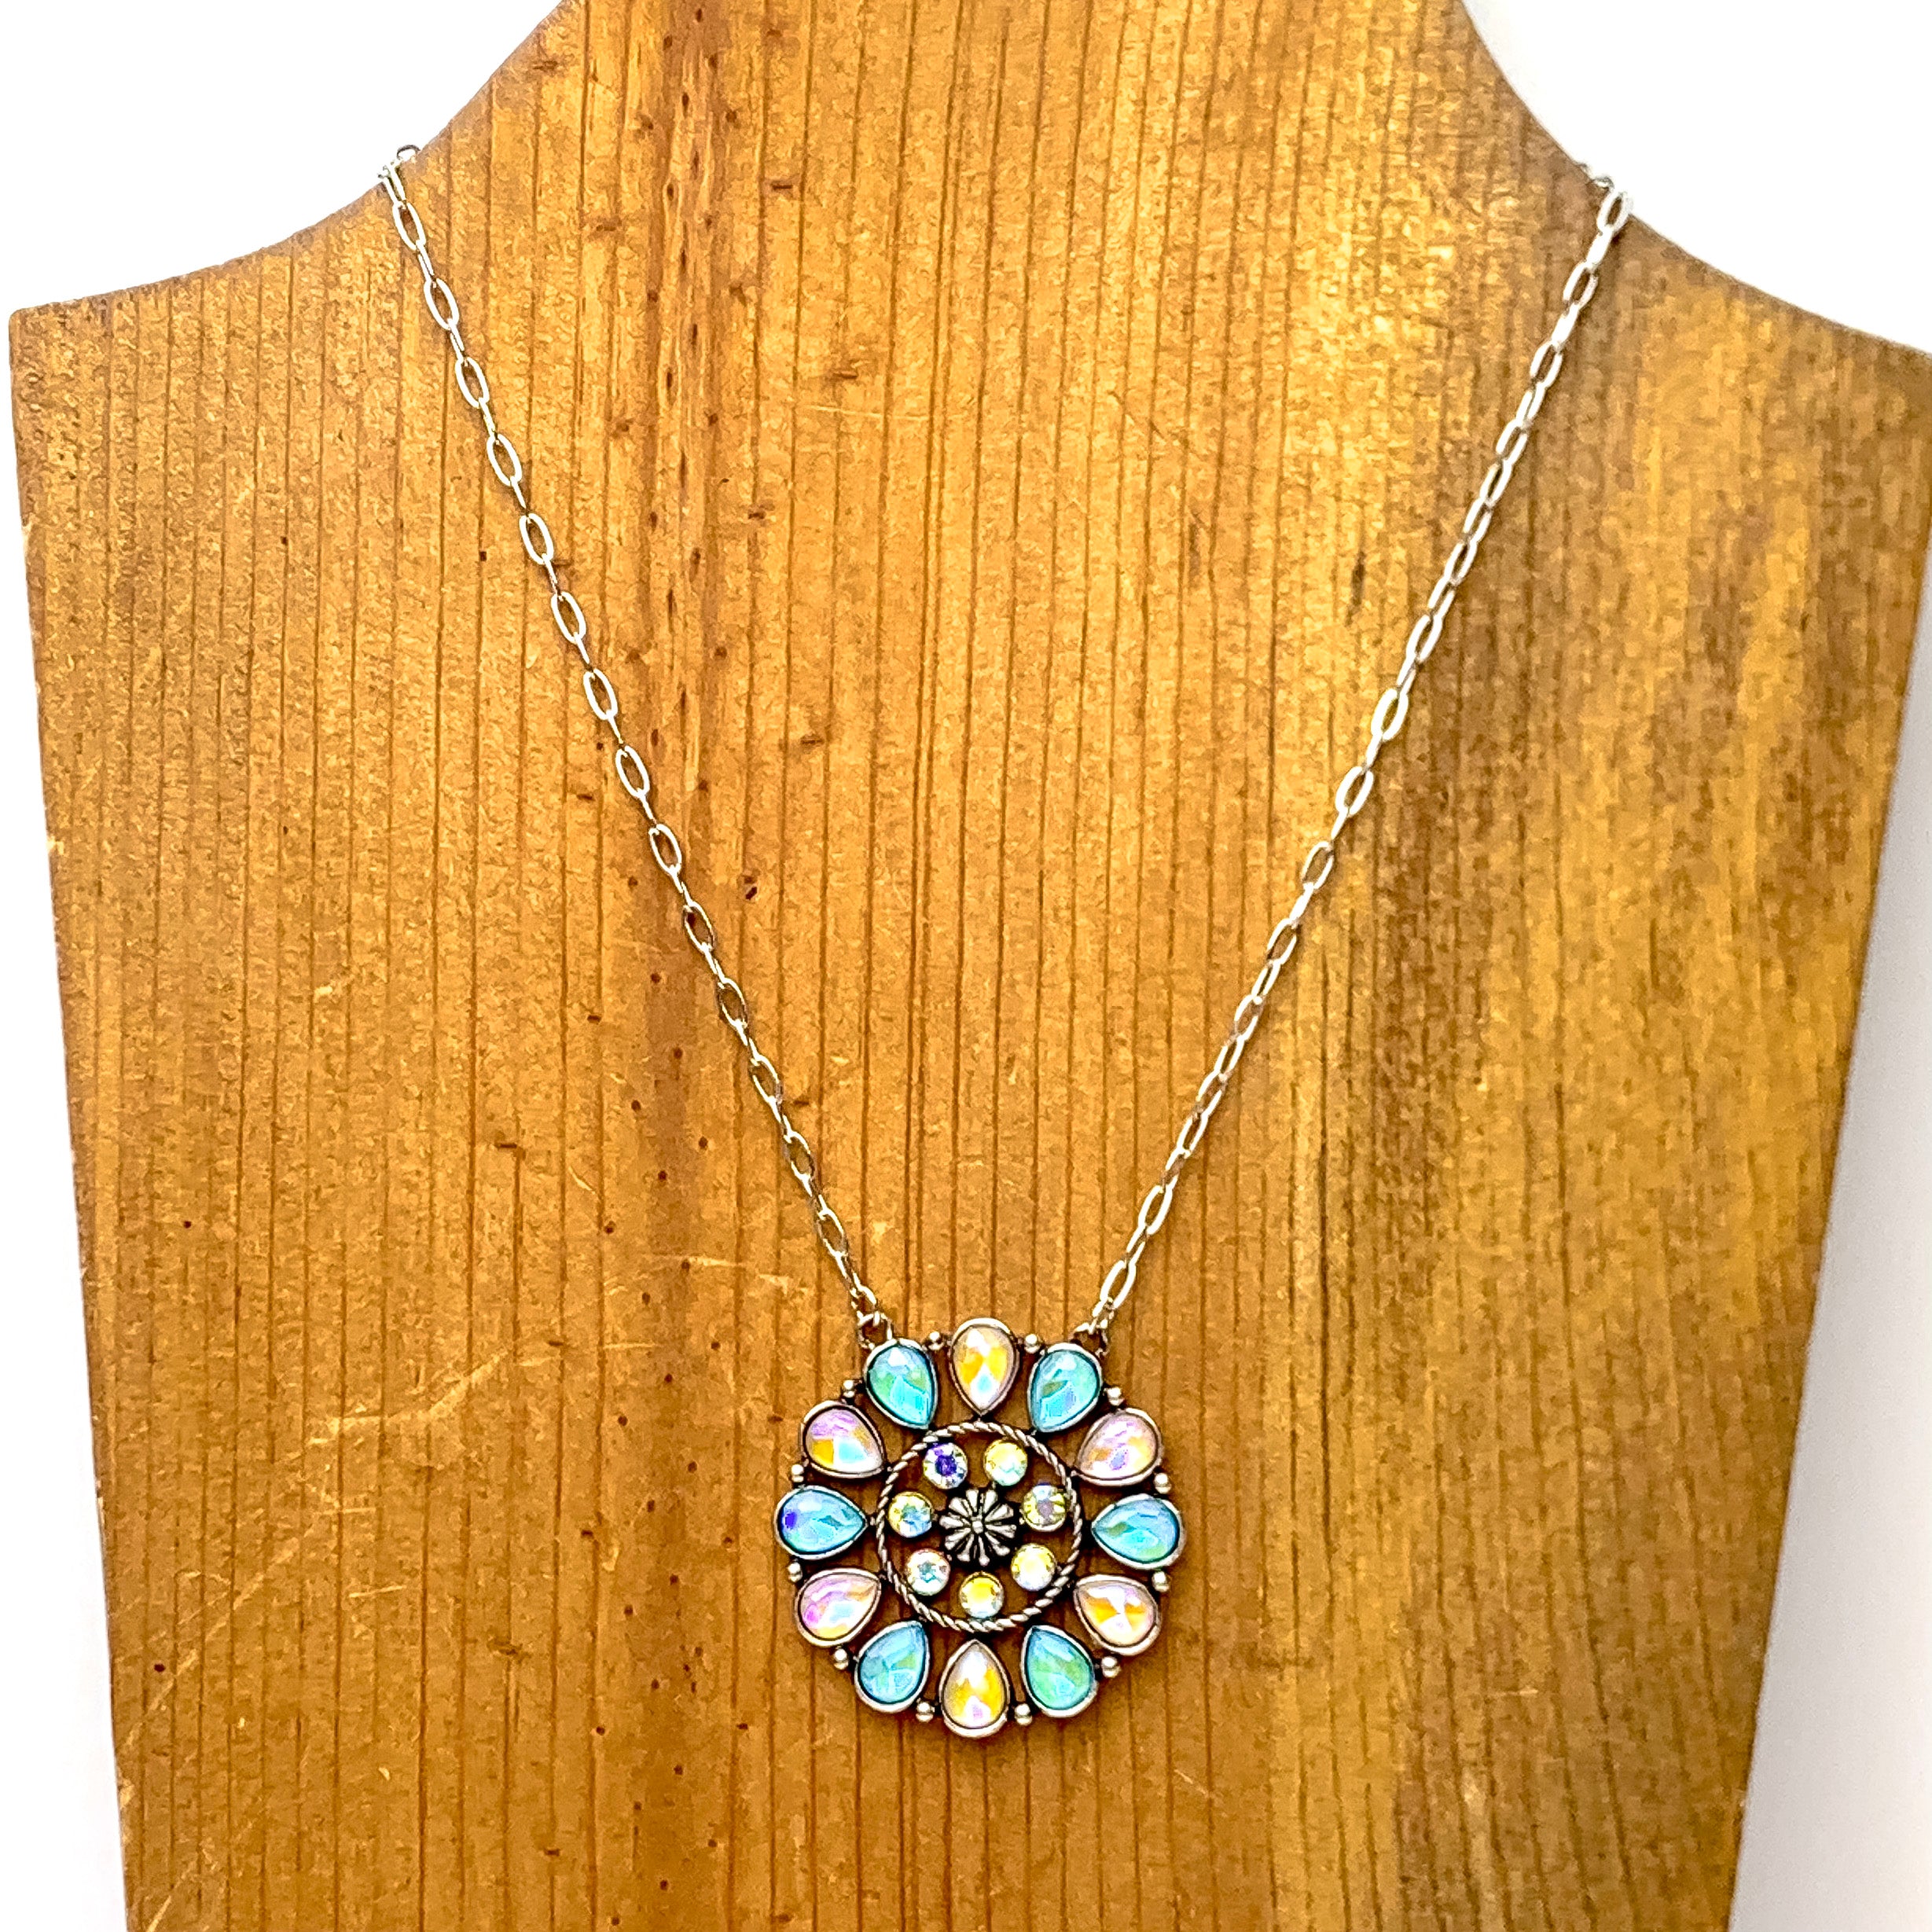 Desert Daisy Silver Tone Flower Concho Necklace in Light Pink and Turquoise - Giddy Up Glamour Boutique